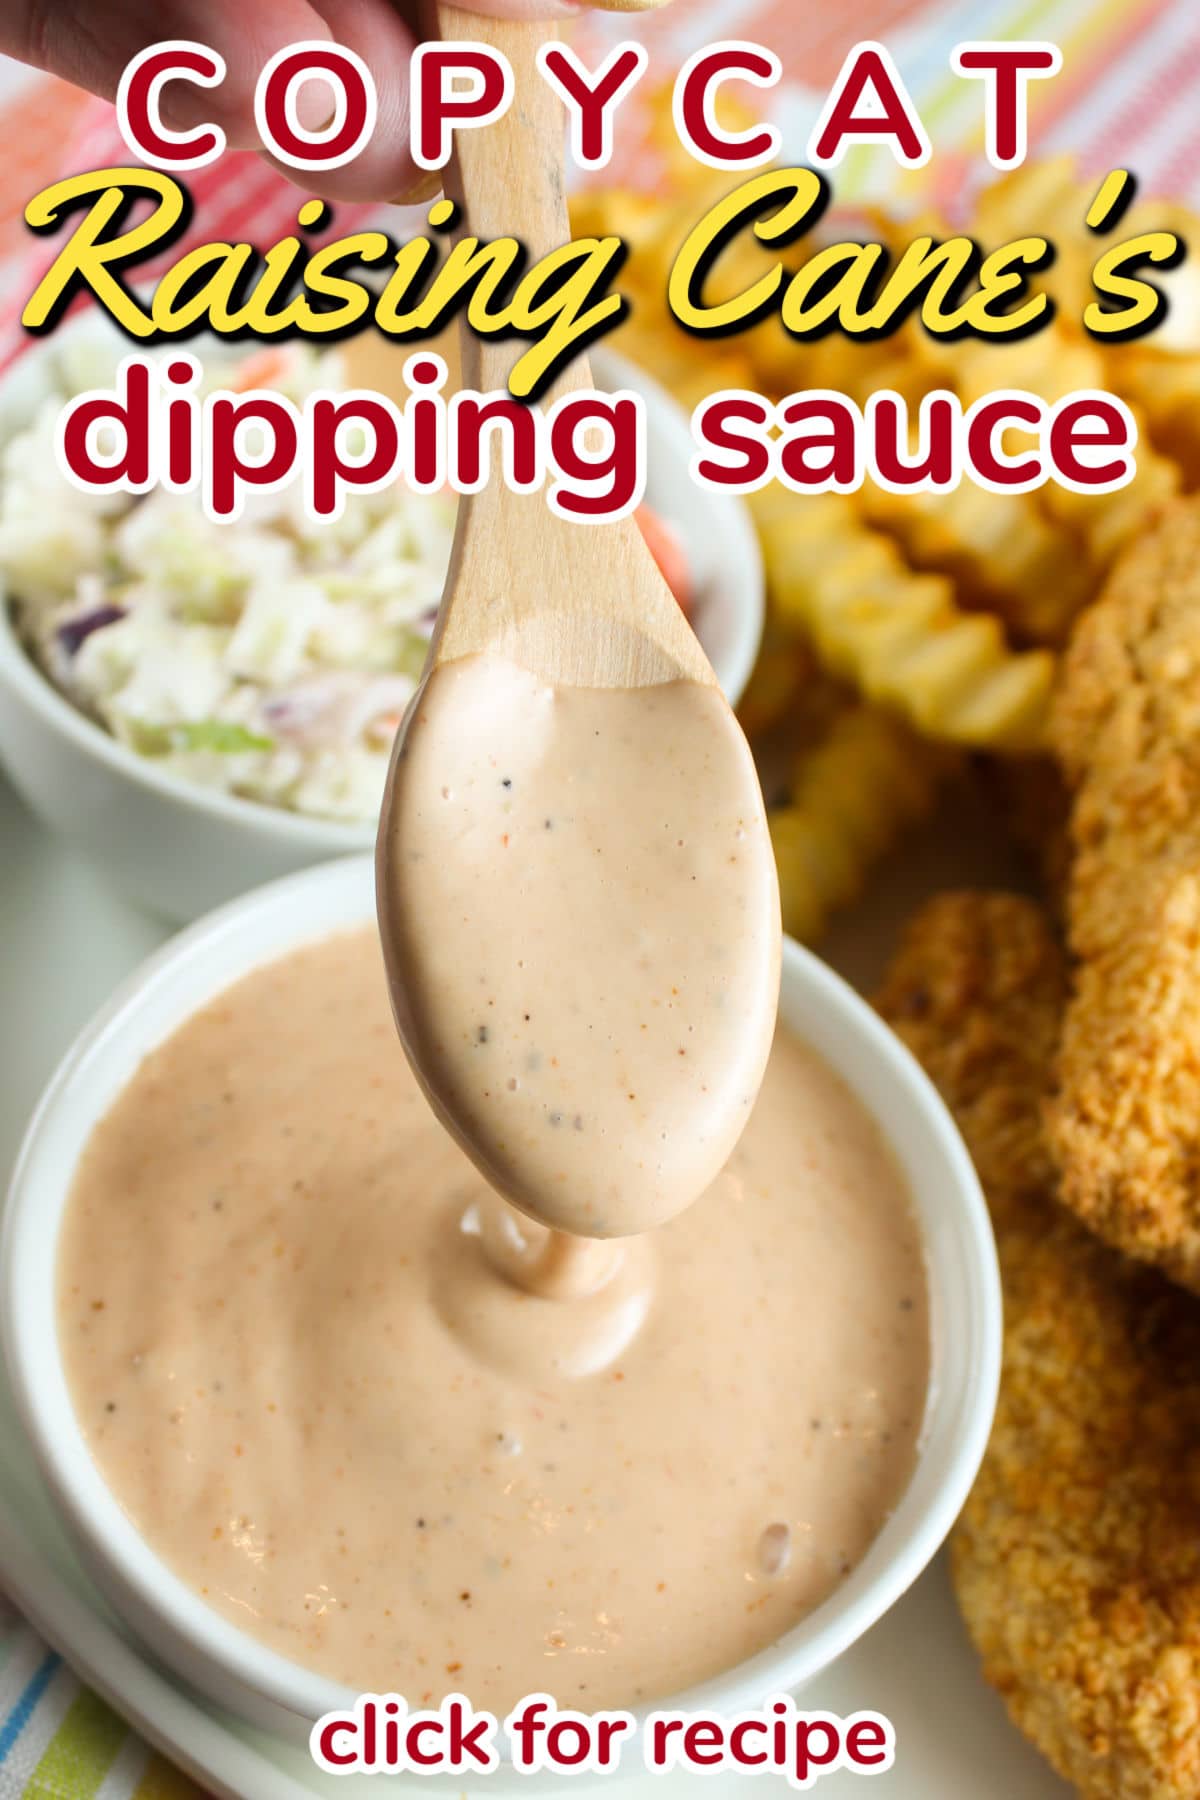 Raising Cane's Sauce is one of my favorite dipping sauces! Plus it's great on more than just chicken! I would always get extra sauce when I went to Raising Cane's to bring home but not any more! I did a side-by-side comparison and made my own!  via @foodhussy